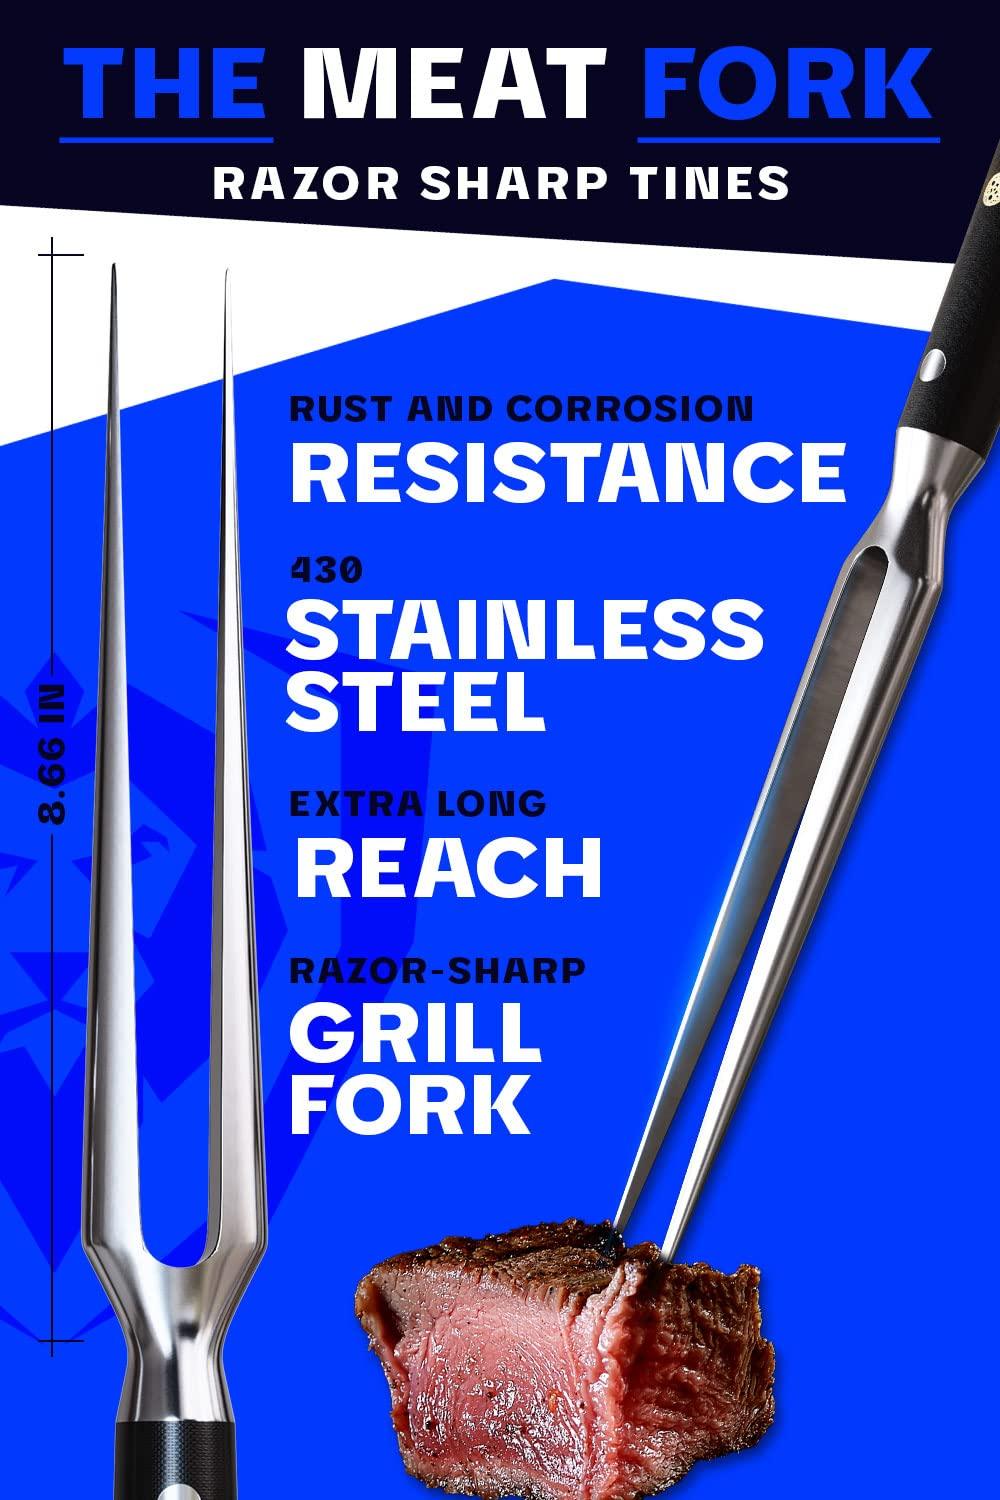 Dalstrong Meat Fork - 7 inch - The Impaler - Dual-Prong Carving & BBQ Fork - High Carbon Stainless Steel - G10 Garolite Handle - Professional Barbecue Carving Fork - Kitchen Utensils - CookCave